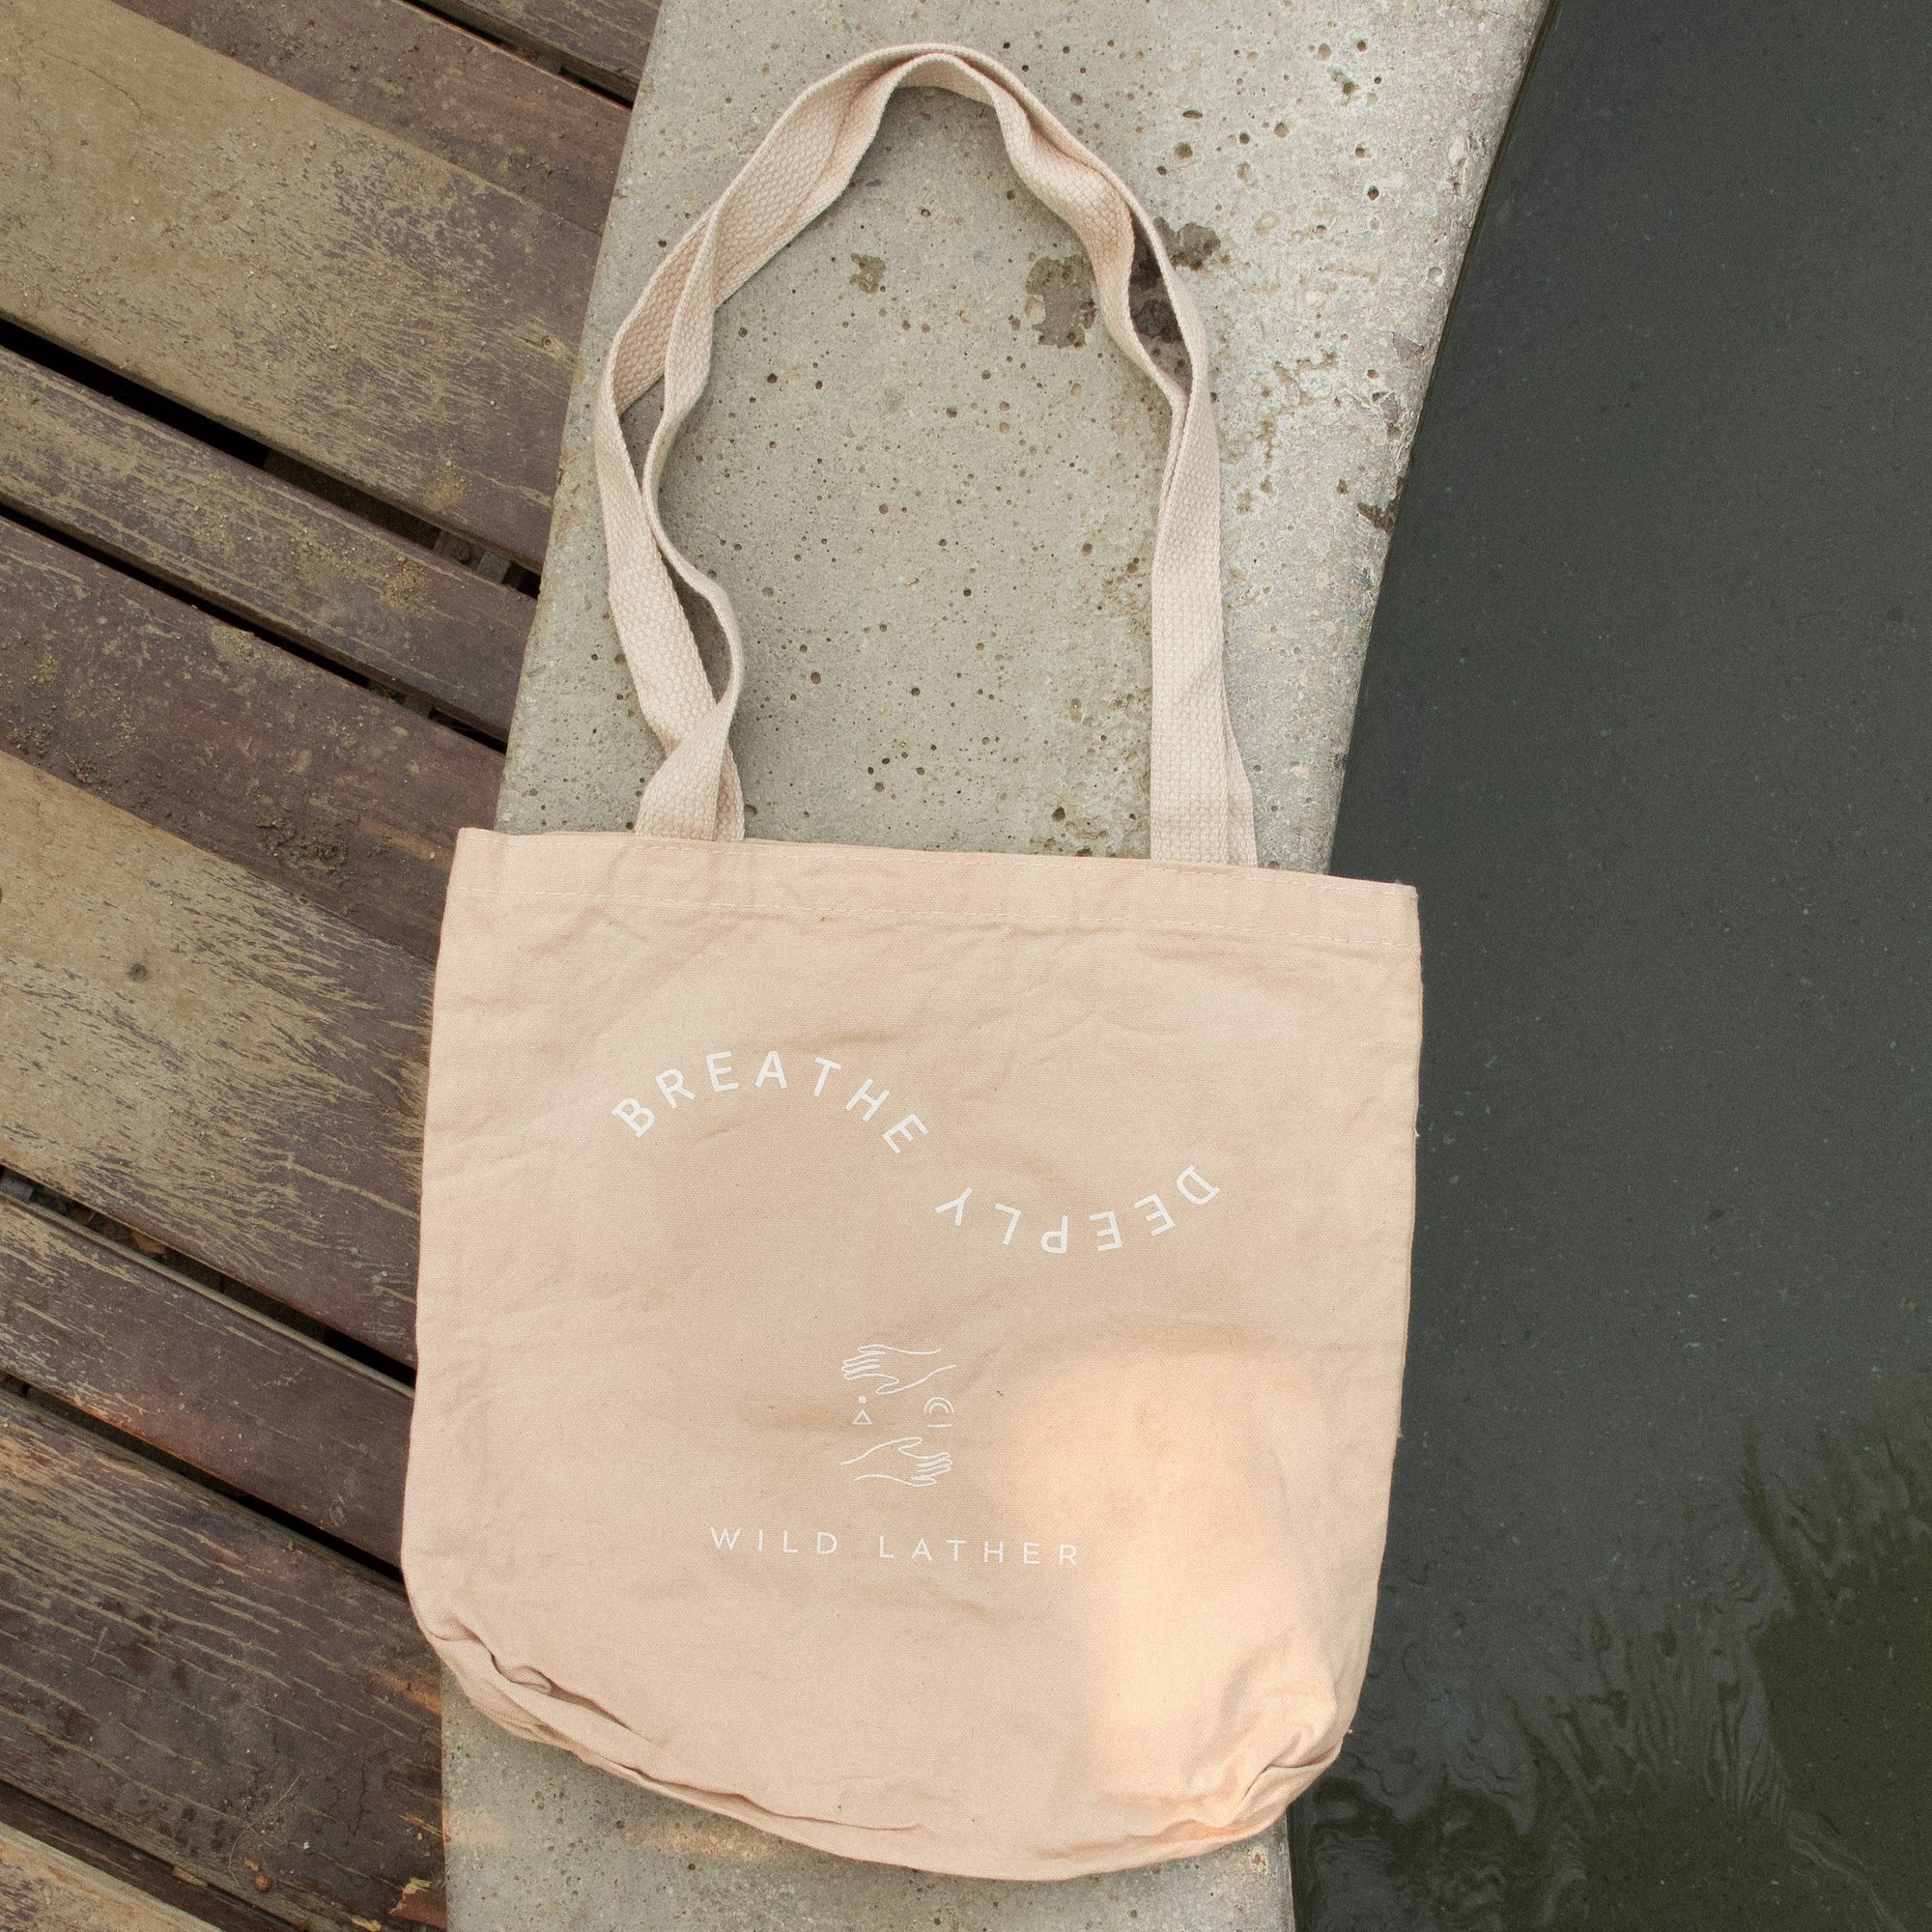 A pale blush tote on the edge of a hot spring tub